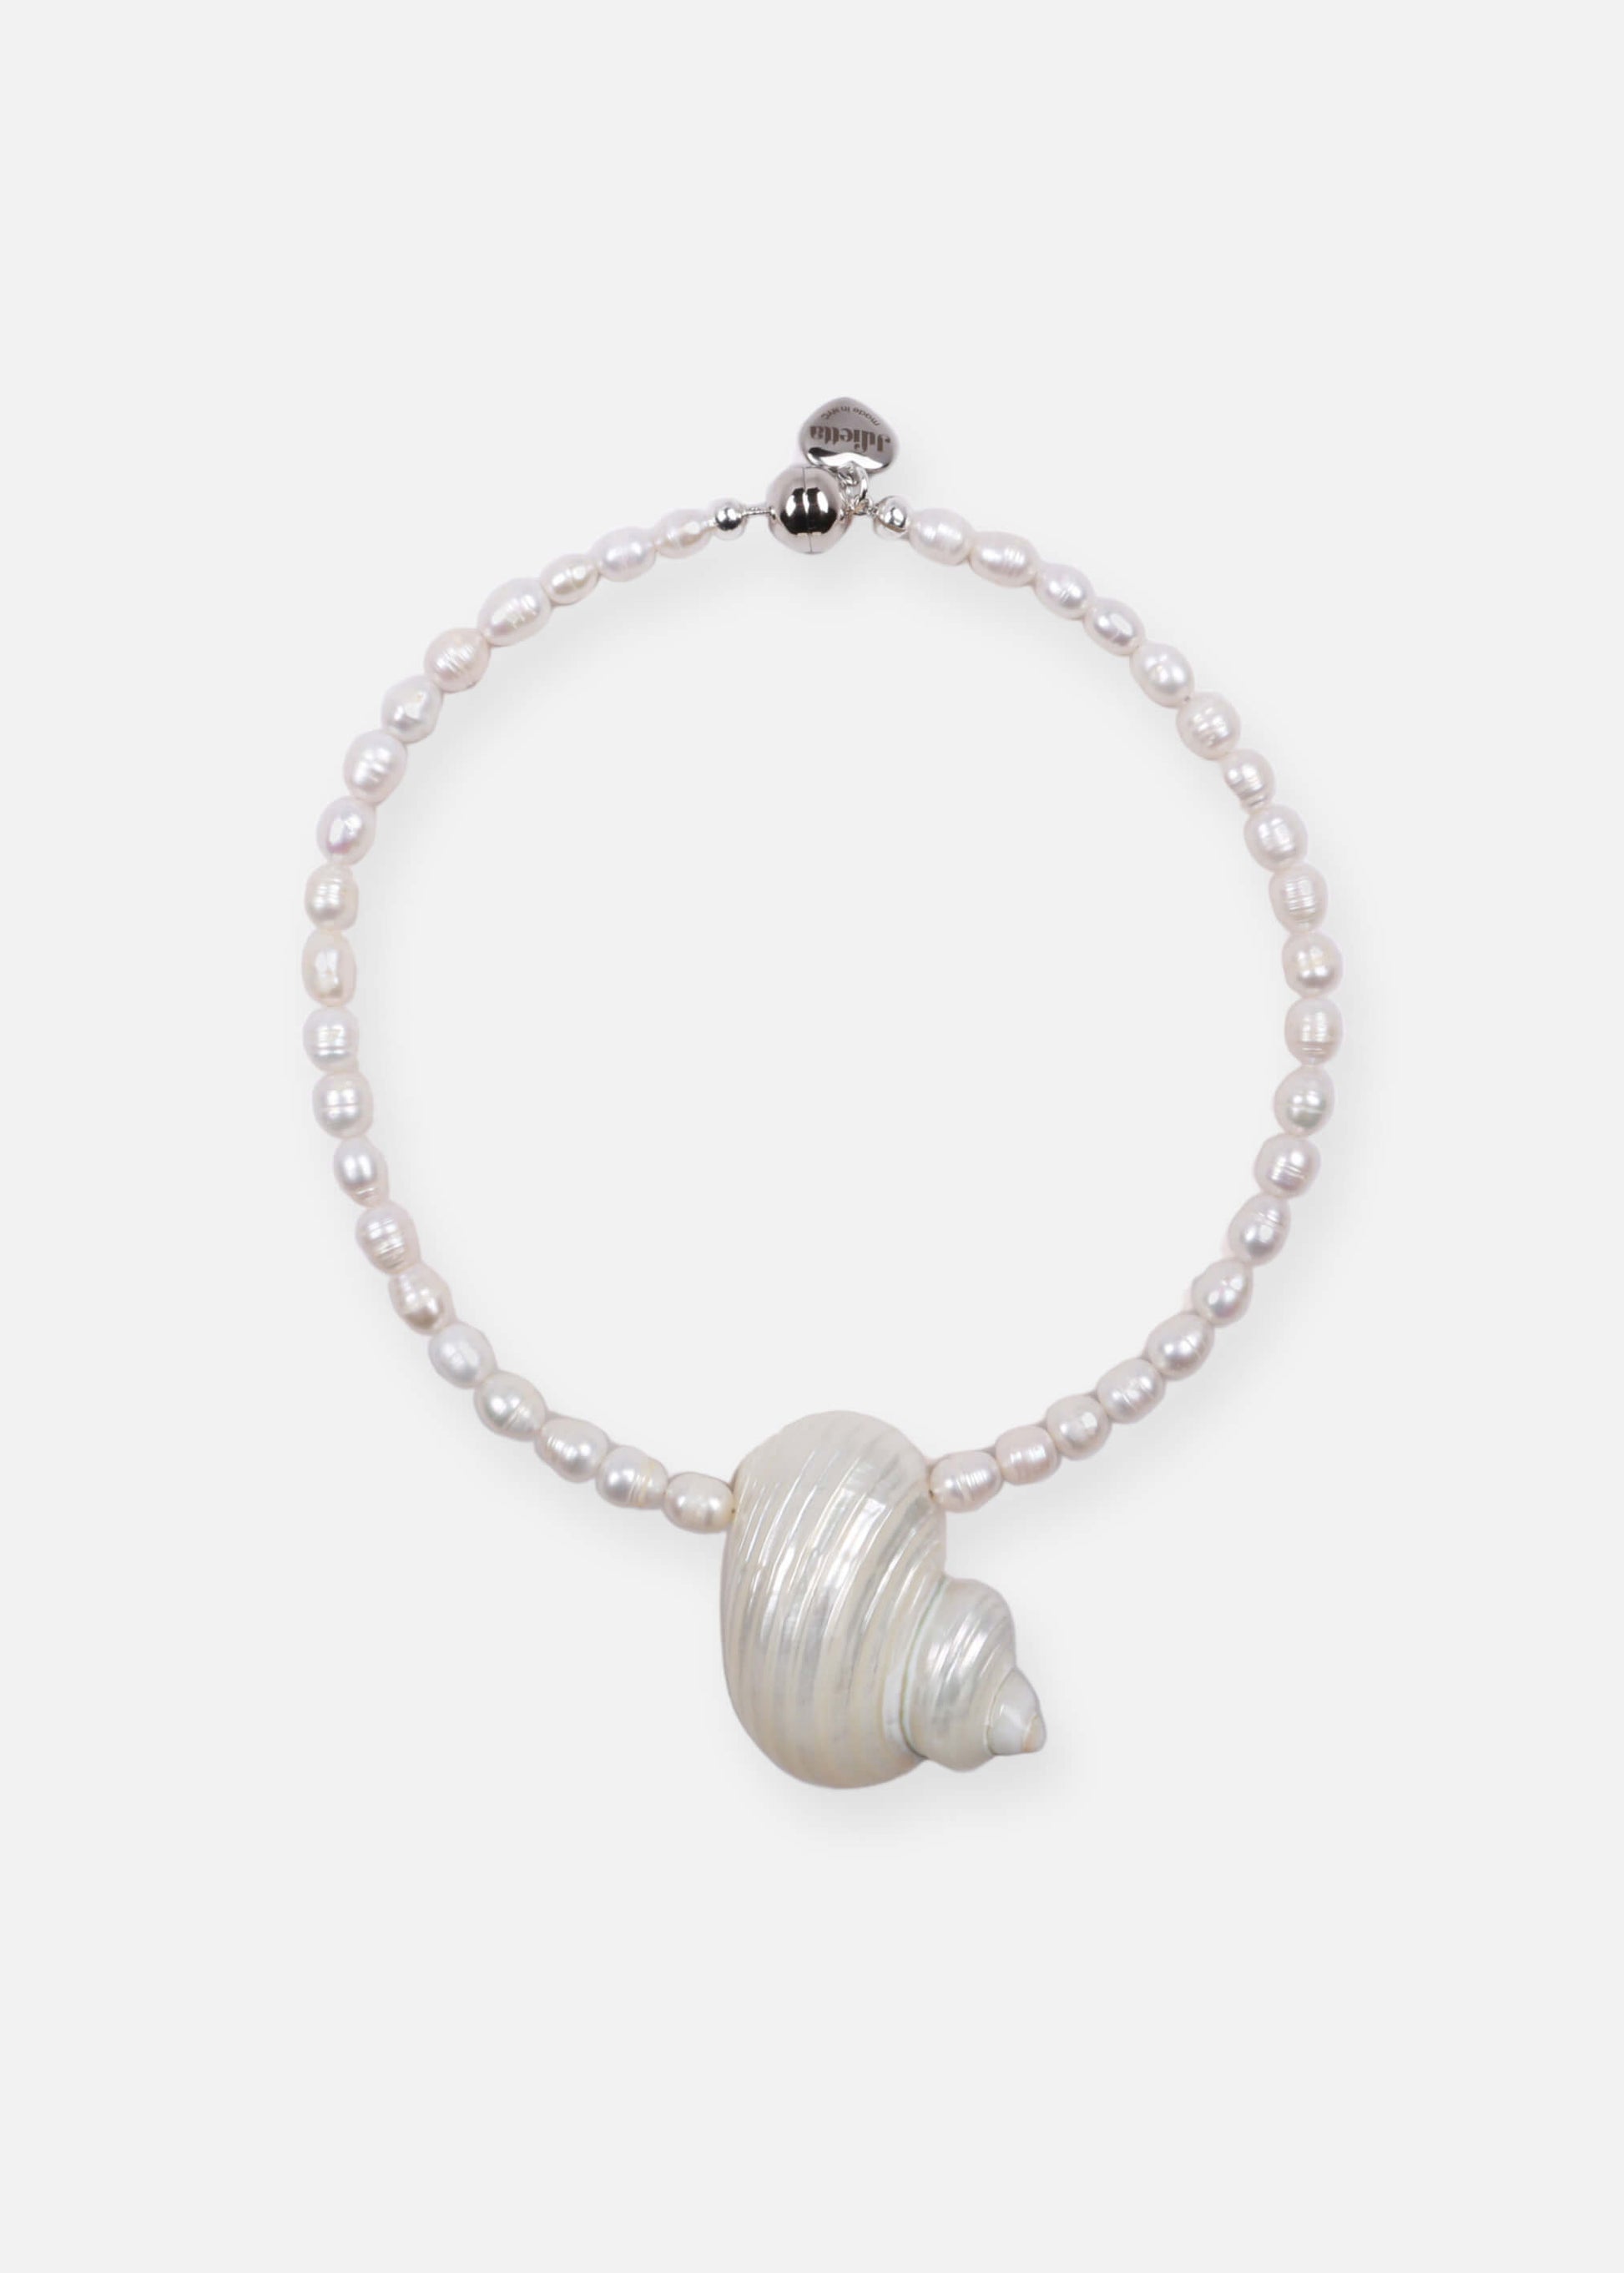 Unique handmade pearl necklace with baroque pearls and real shell. Support sustainability!